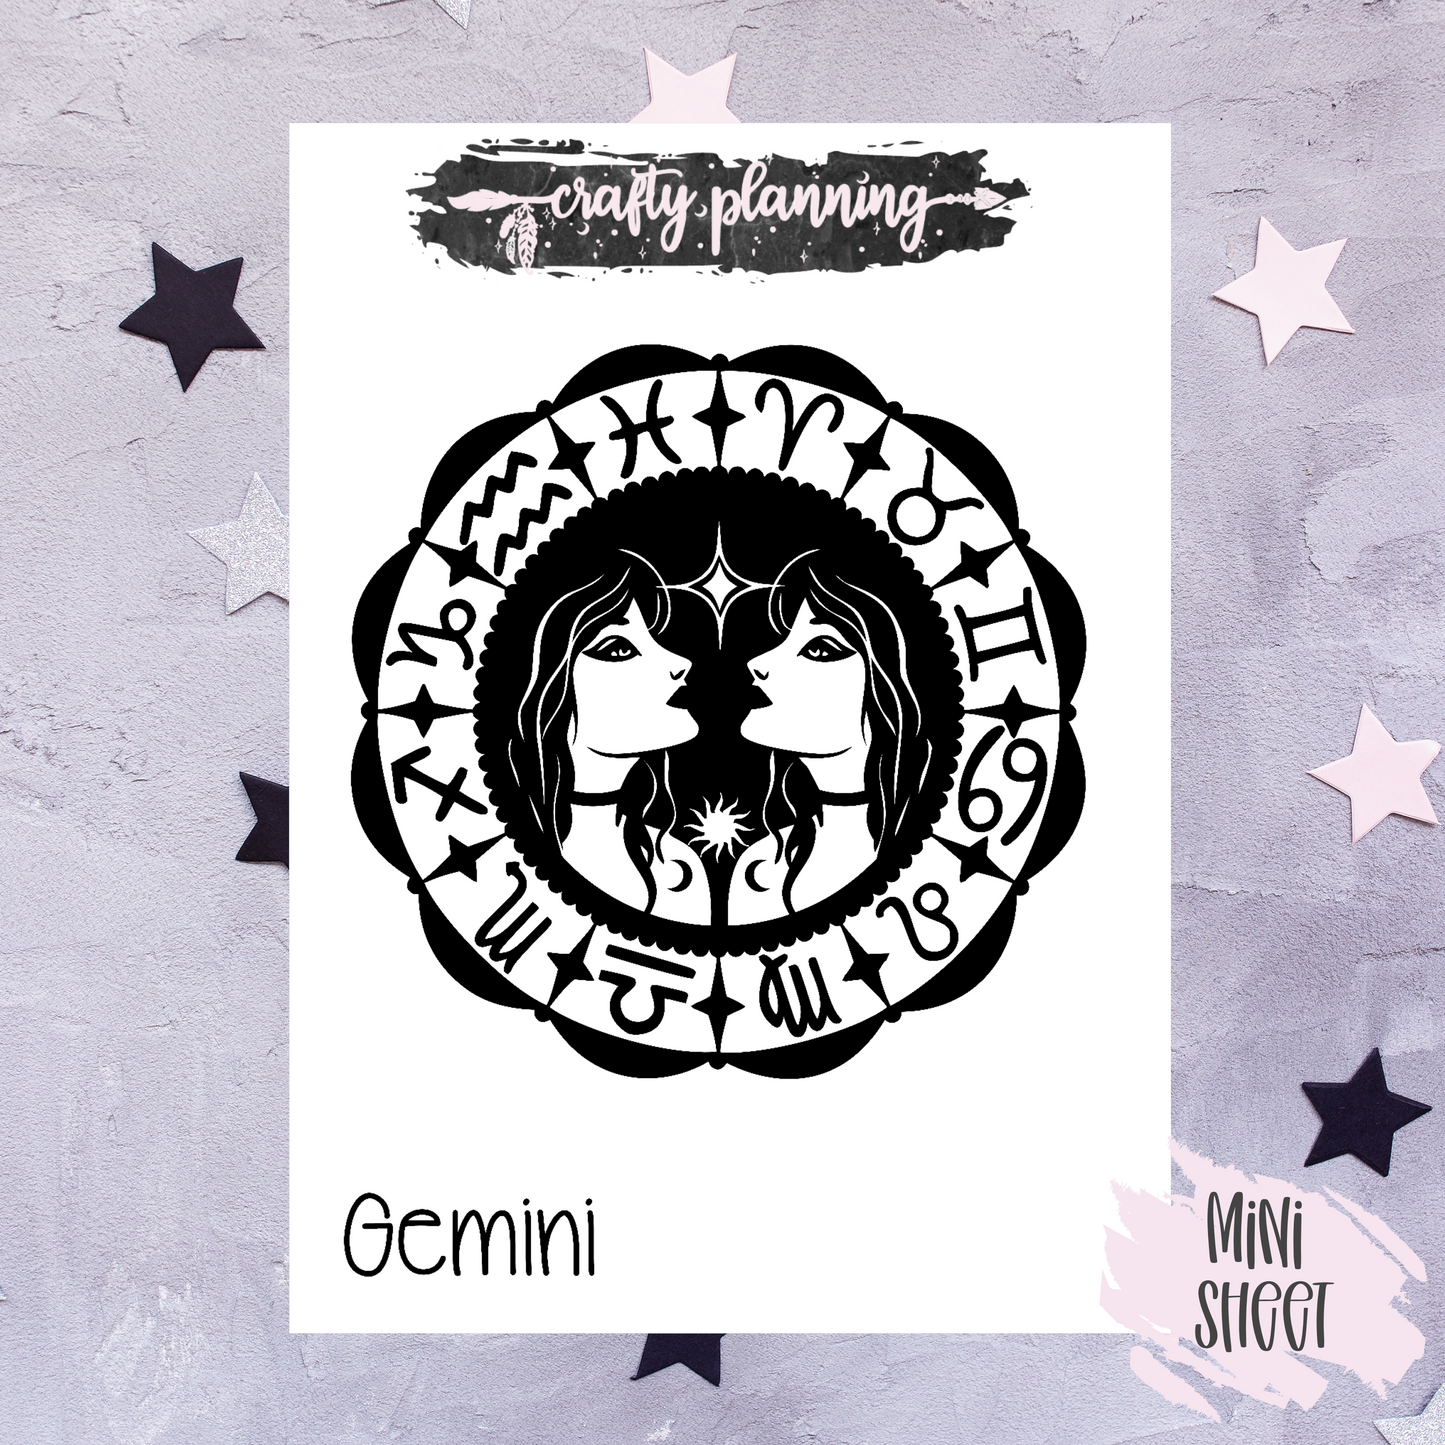 Gemini Stickers, Zodiac Stickers, Star Sign Stickers, Gothic Stickers, Witchcraft Stickers, Birthday Gift For Her, Astrology Stickers